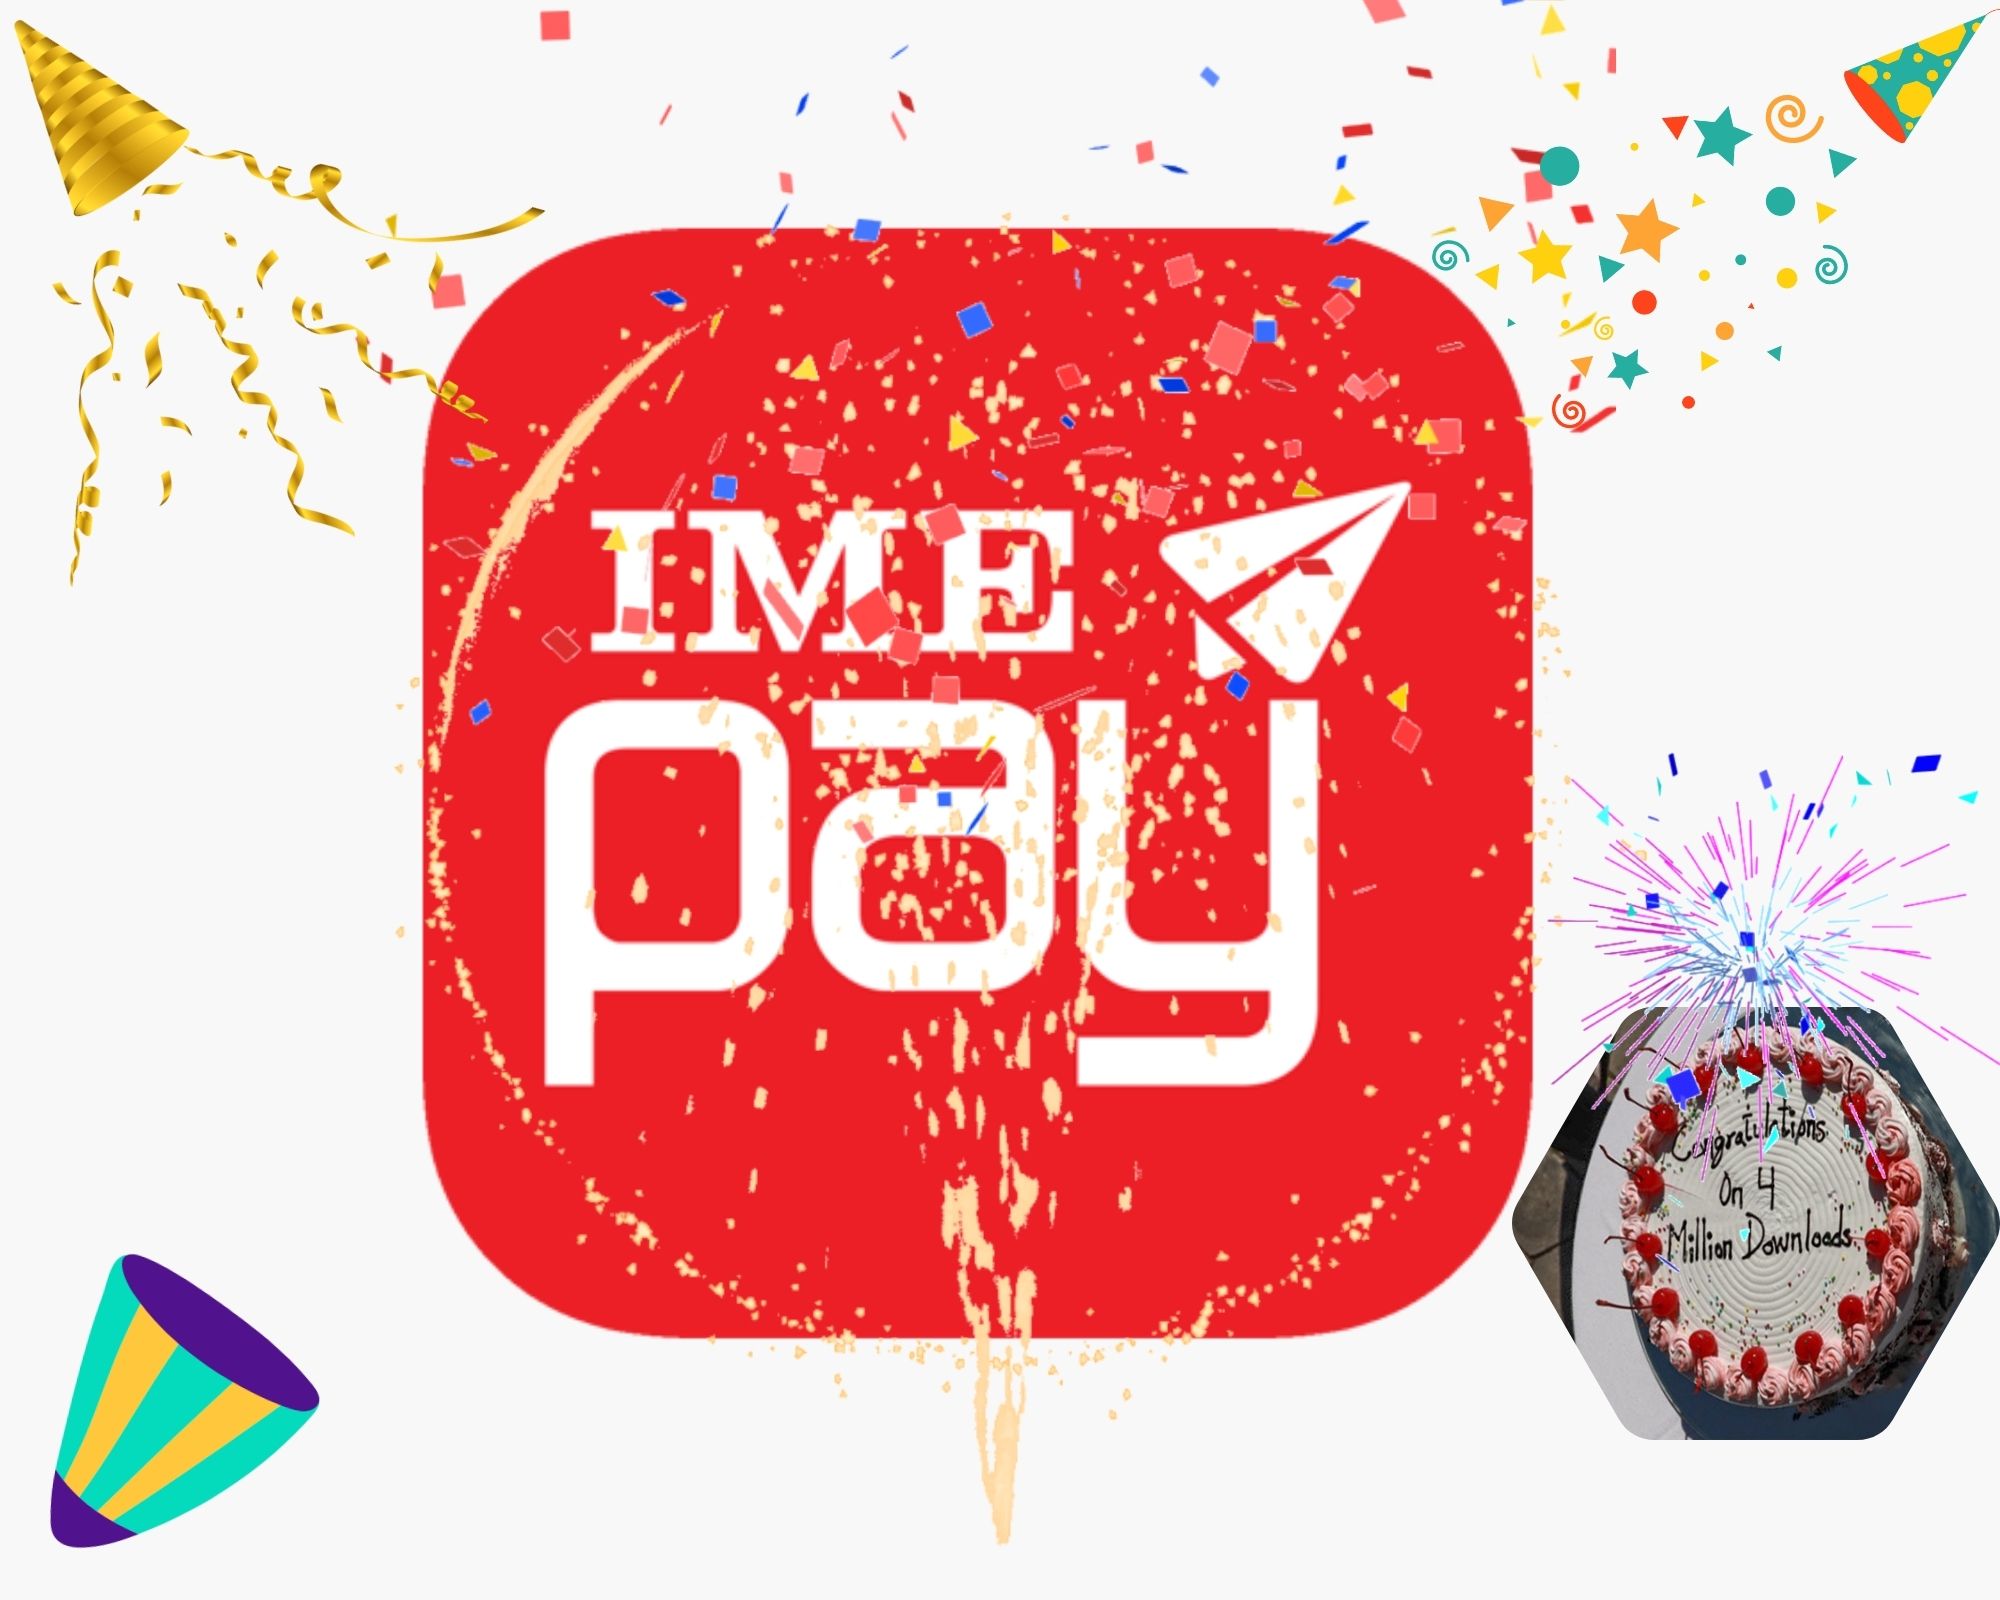 IME Pay app downloads reached 4 million